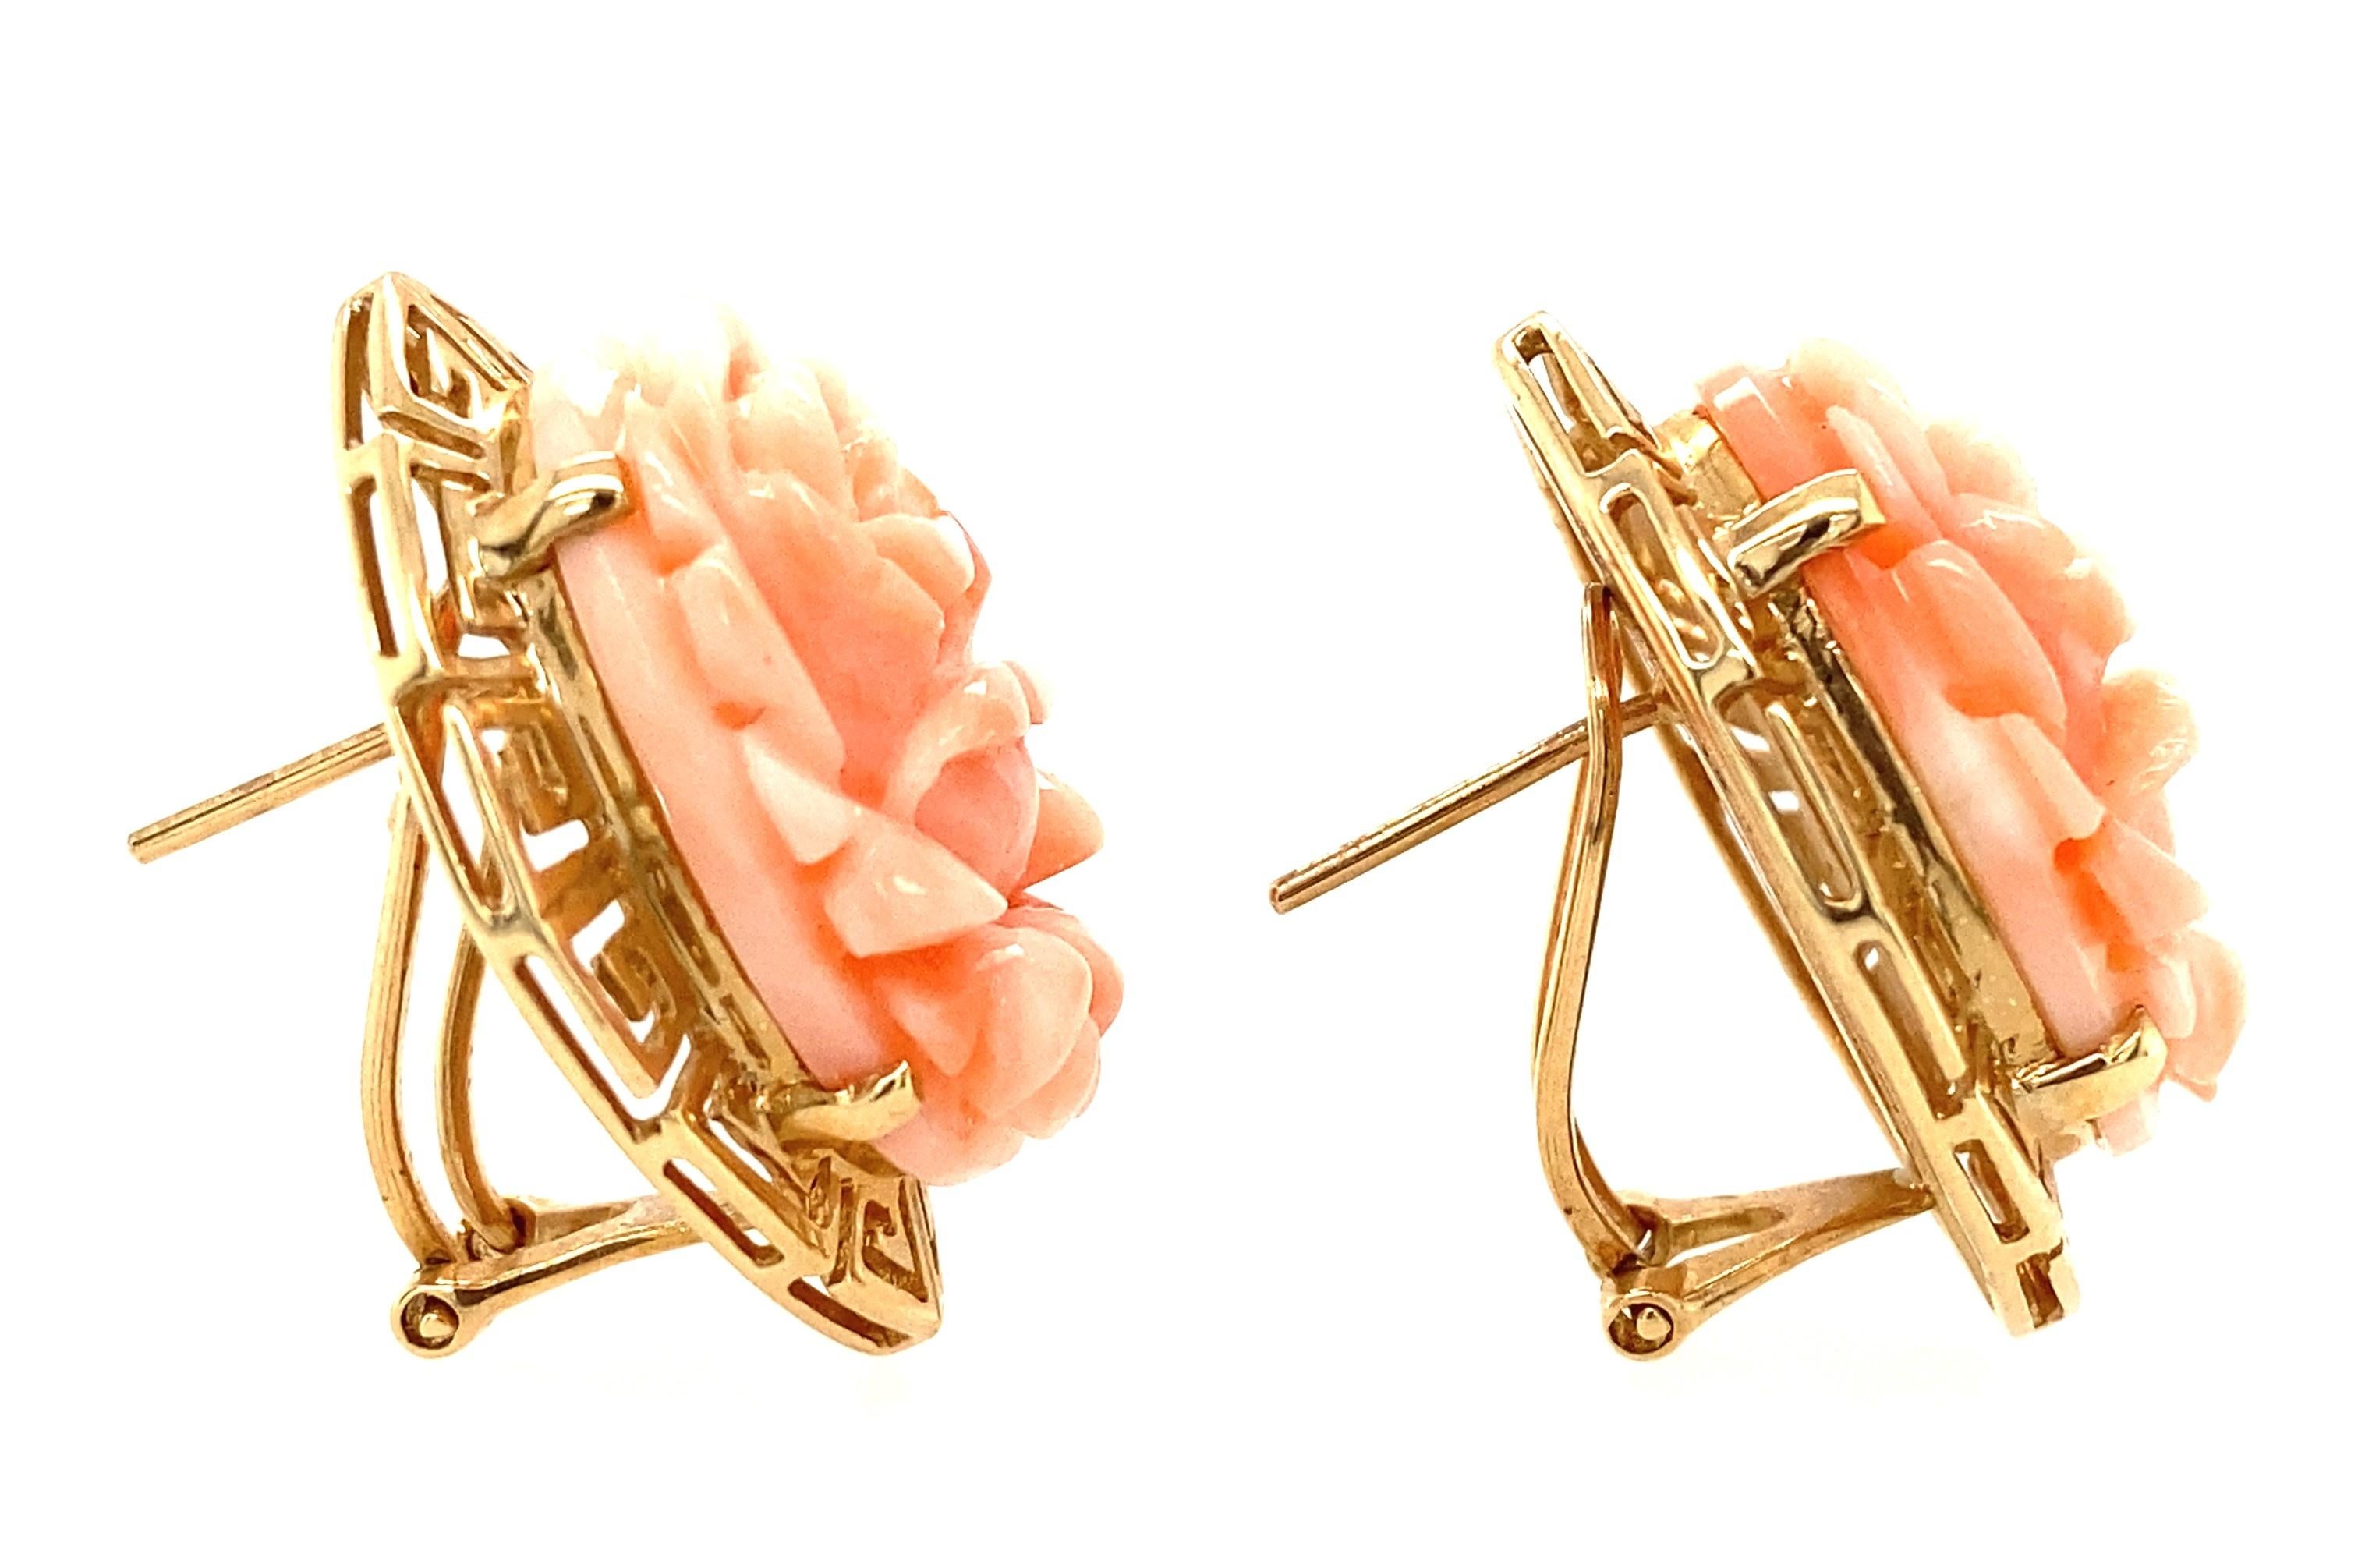 Evoking the Mediterranean in the peachy carved coral and the Greek key gold design, these wonderfully three-dimensional earrings are sure to be a stand-out in your earring collection. Omega backs hold the earring correctly on the ear to avoid